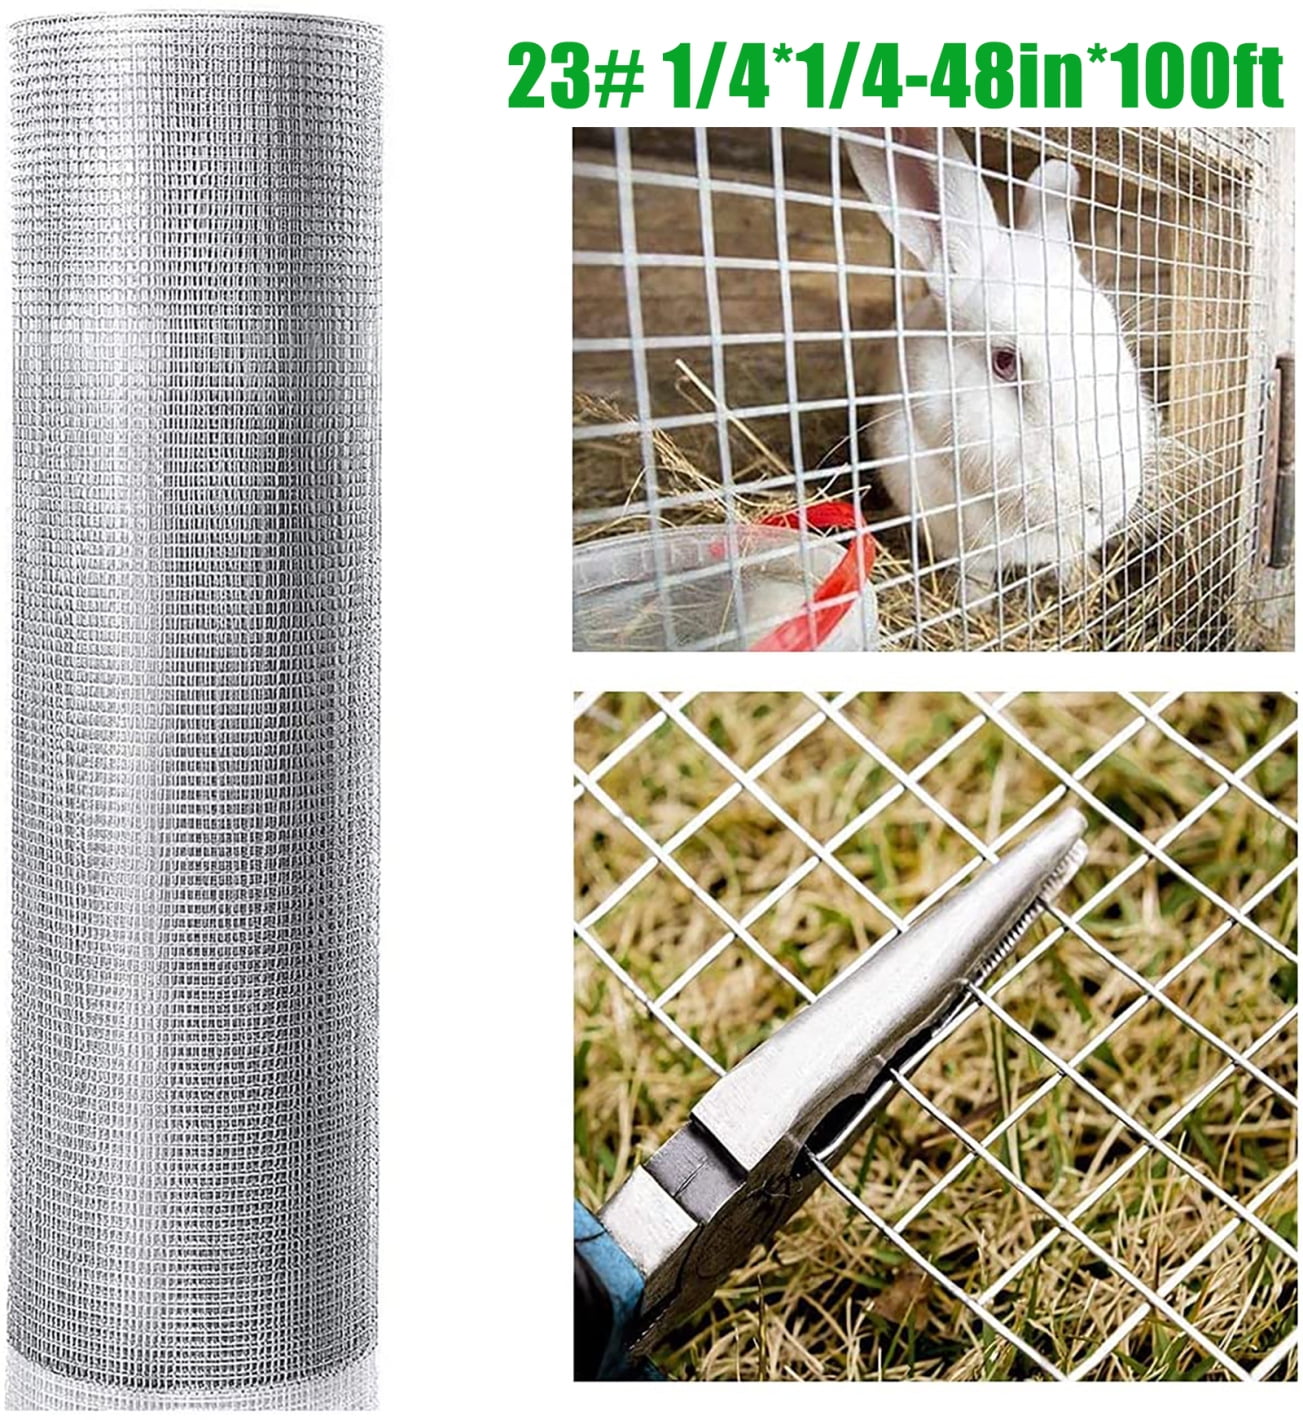 CACAGDR Hardware Cloth 48inx50ft 1/2 Inch 19 Gauge Galvanized After Welding  Wire Cloth Fencing,Rabbit/Snake Wire mesh Roll,Chicken Wire Fencing